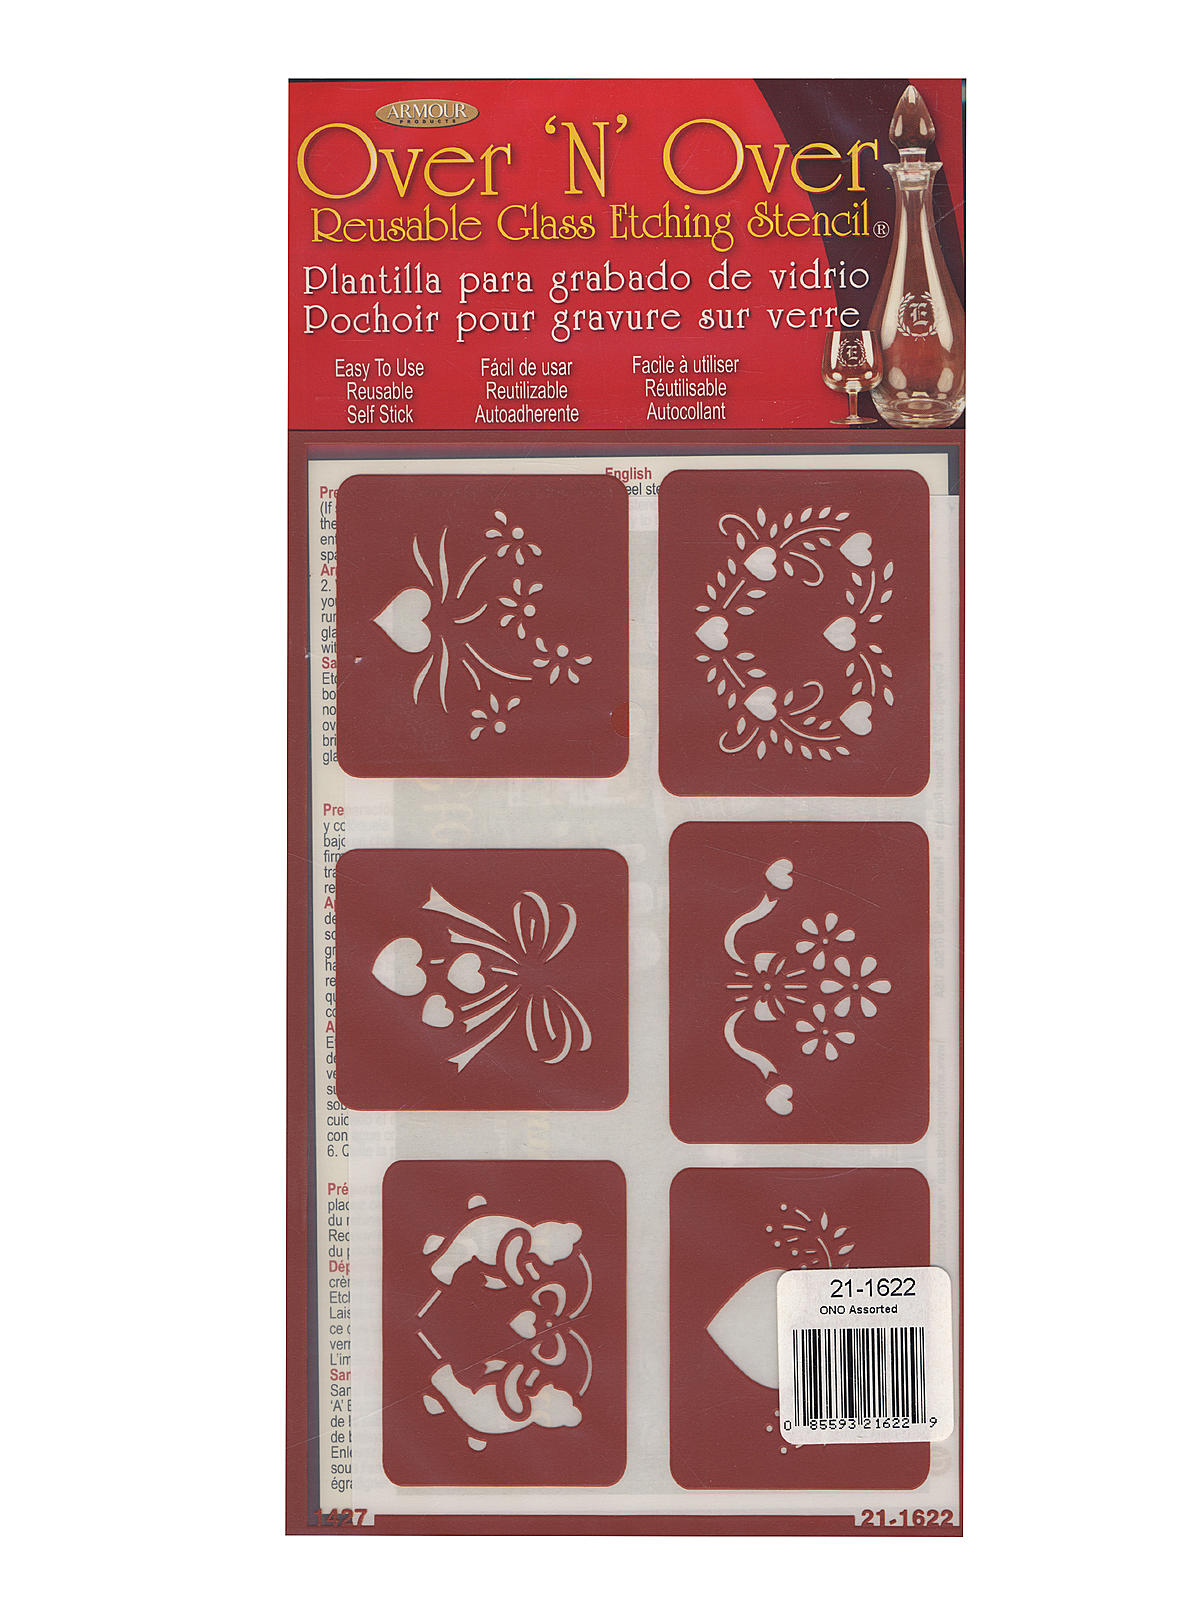 Over'n'Over Re-usable Glass Etching Stencils Assorted Each